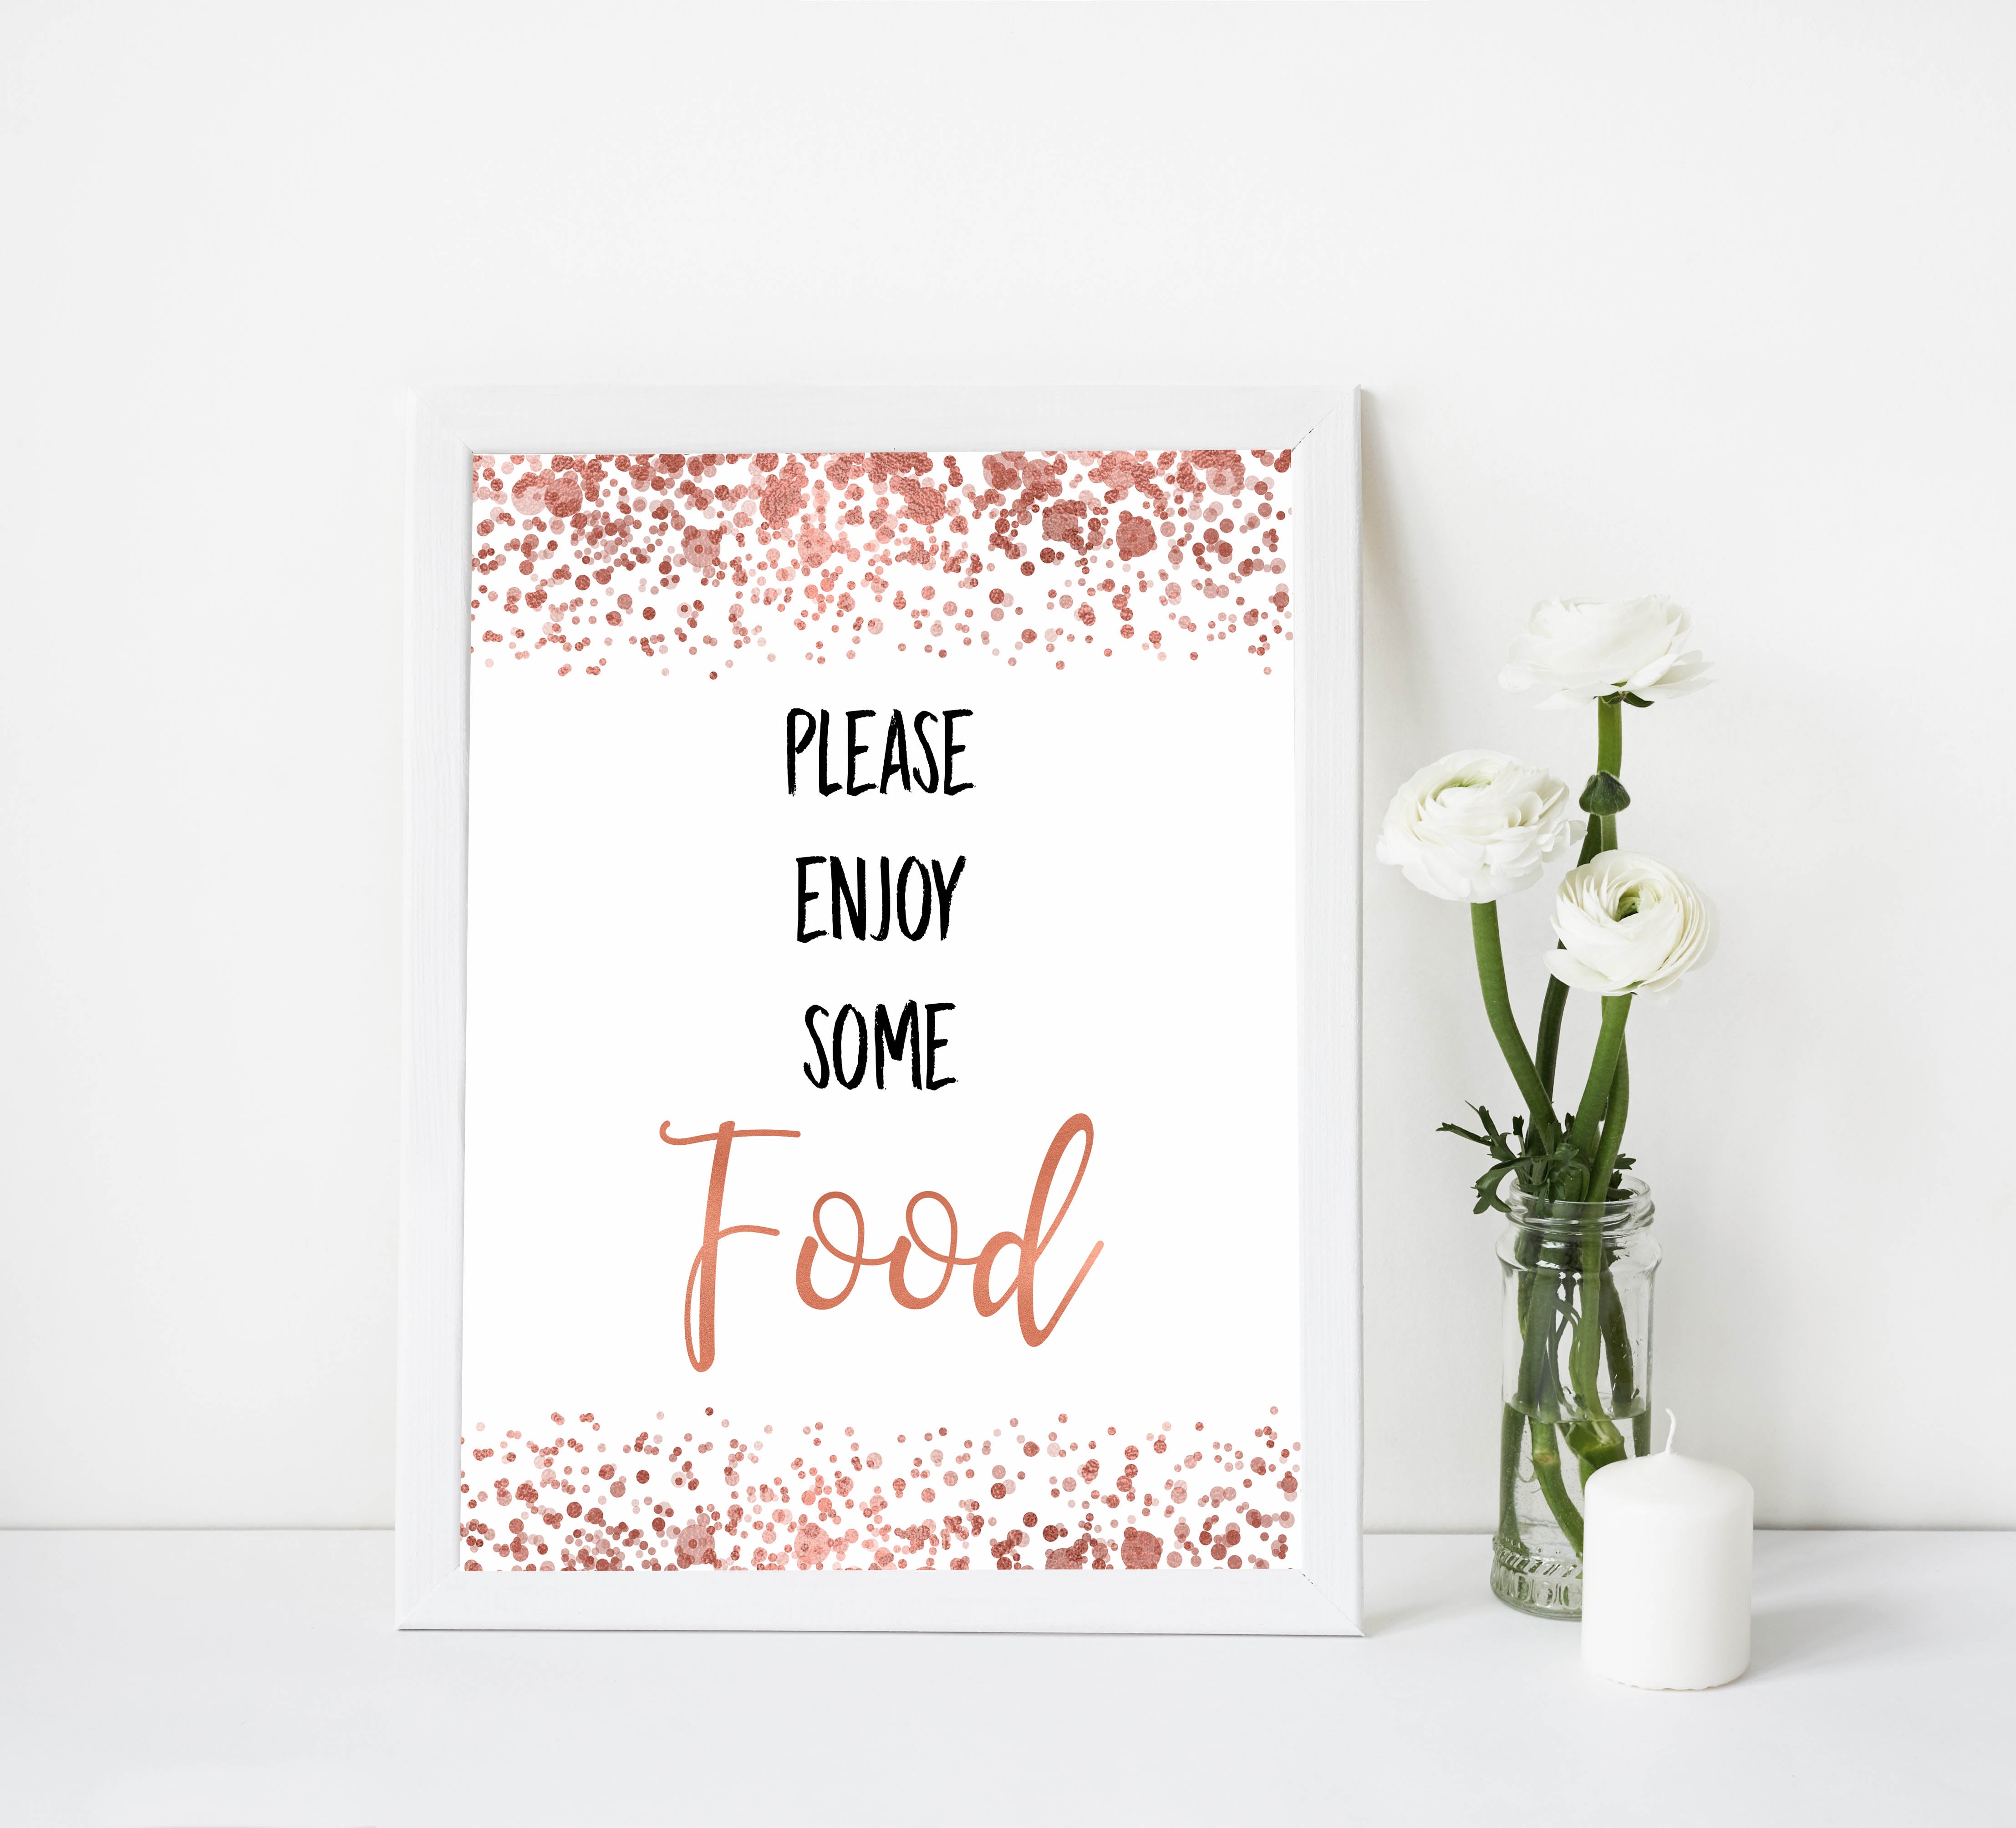 food baby table signs, food baby table decor, Rose gold baby decor, printable baby table signs, printable baby decor, rose gold table signs, fun baby signs, rose gold fun baby table signs